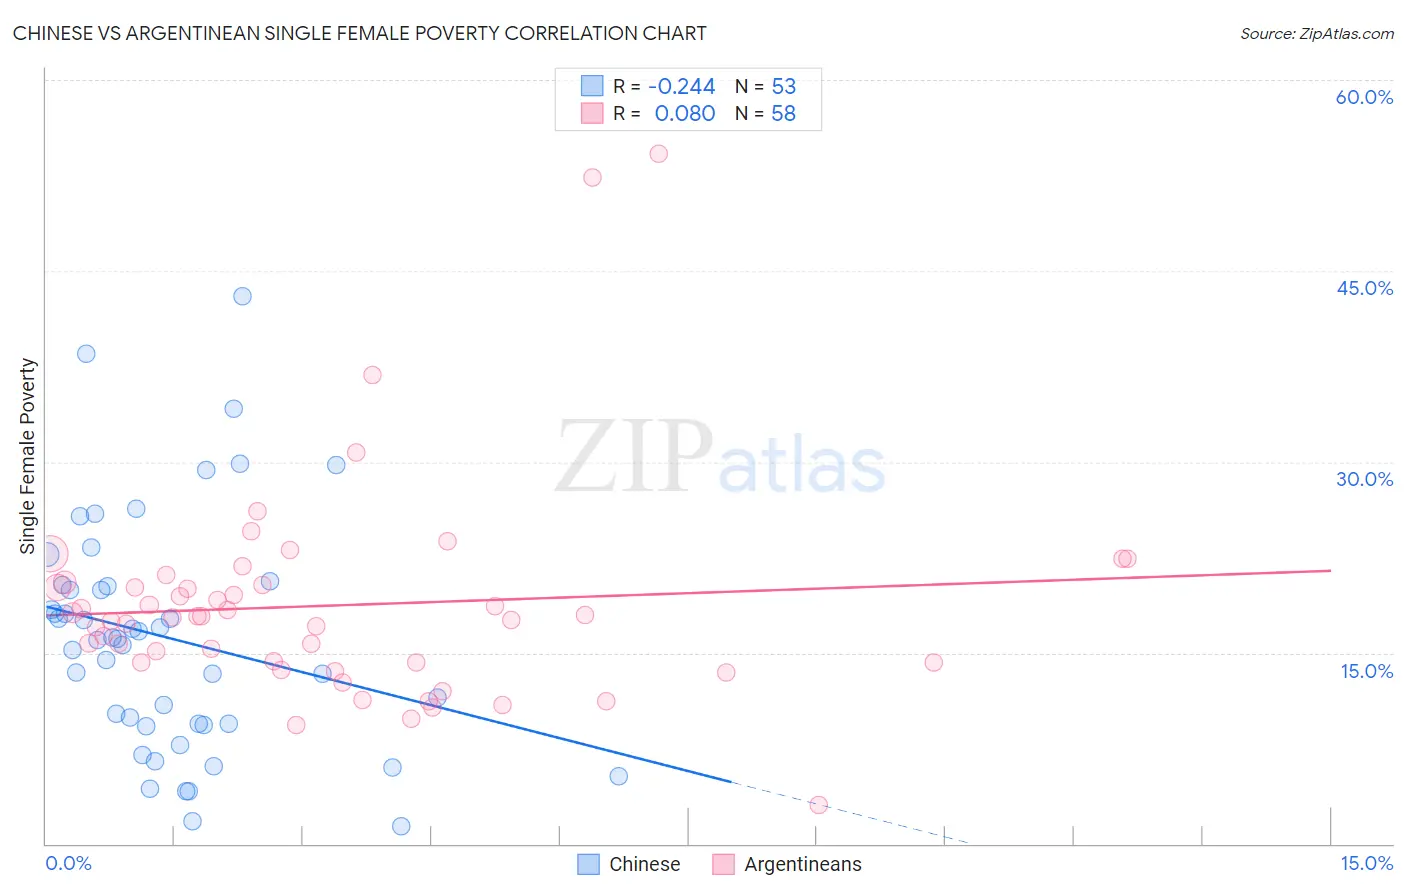 Chinese vs Argentinean Single Female Poverty